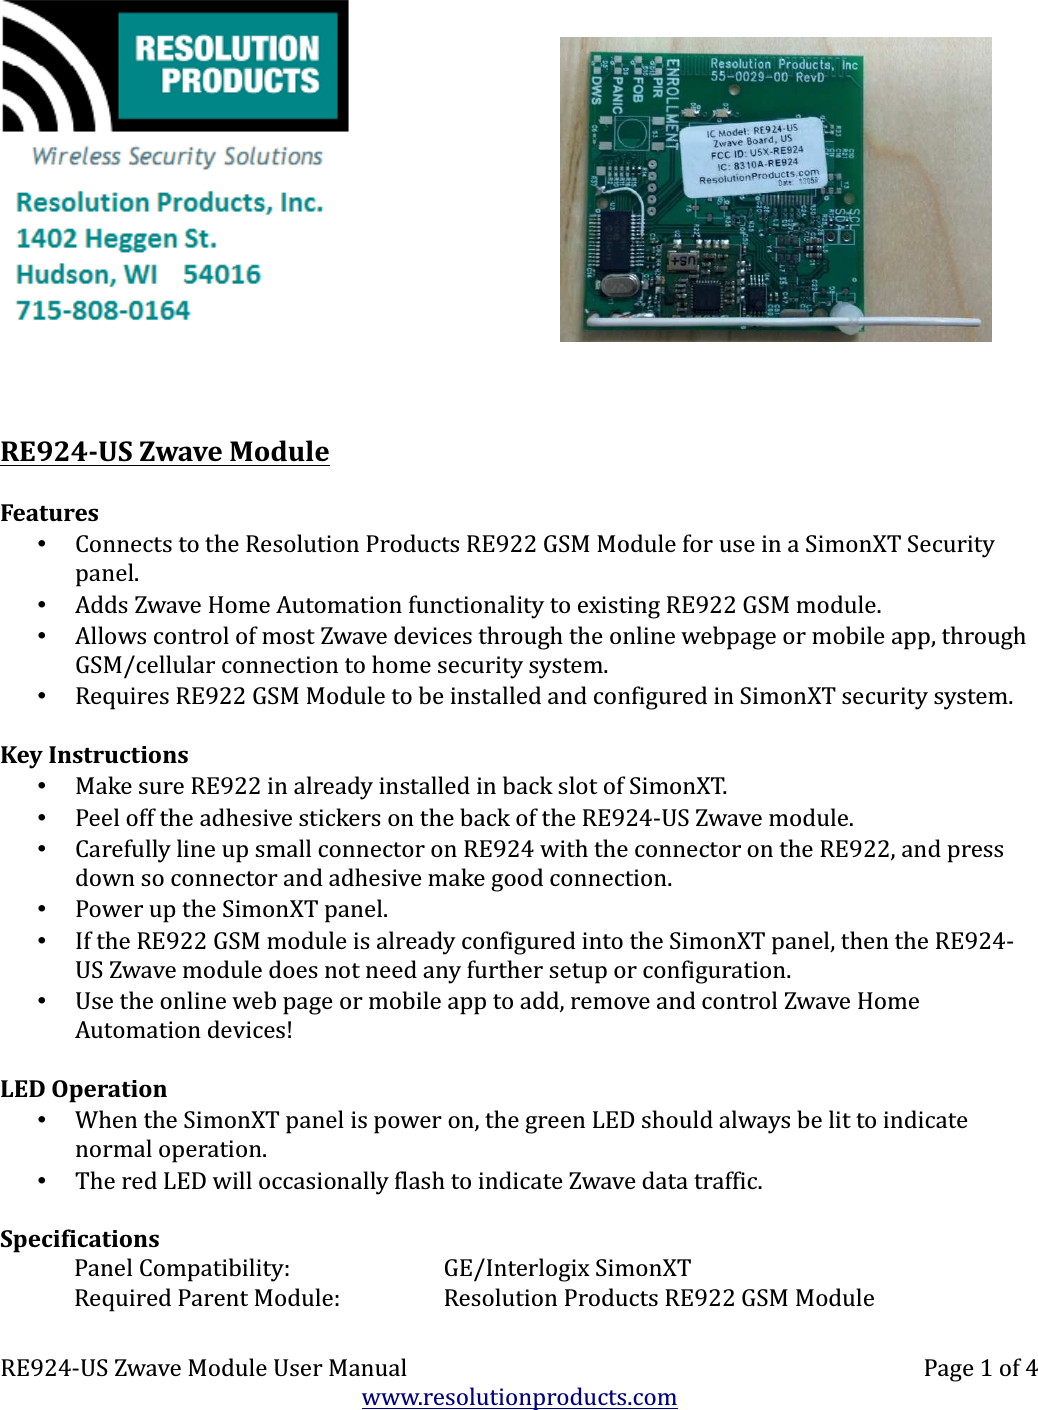 RE924-US Zwave ModuleFeatures•Connects to the Resolution Products RE922 GSM Module for use in a SimonXT Security panel.•Adds Zwave Home Automation functionality to existing RE922 GSM module.•Allows control of most Zwave devices through the online webpage or mobile app, through GSM/cellular connection to home security system.•Requires RE922 GSM Module to be installed and configured in SimonXT security system.Key Instructions•Make sure RE922 in already installed in back slot of SimonXT.•Peel off the adhesive stickers on the back of the RE924-US Zwave module.•Carefully line up small connector on RE924 with the connector on the RE922, and press down so connector and adhesive make good connection.•Power up the SimonXT panel.•If the RE922 GSM module is already configured into the SimonXT panel, then the RE924-US Zwave module does not need any further setup or configuration.•Use the online web page or mobile app to add, remove and control Zwave Home Automation devices!LED Operation•When the SimonXT panel is power on, the green LED should always be lit to indicate normal operation.•The red LED will occasionally flash to indicate Zwave data traffic.SpecificationsPanel Compatibility: GE/Interlogix SimonXTRequired Parent Module: Resolution Products RE922 GSM ModuleRE924-US Zwave Module User Manual Page 1 of 4www.resolutionproducts.com